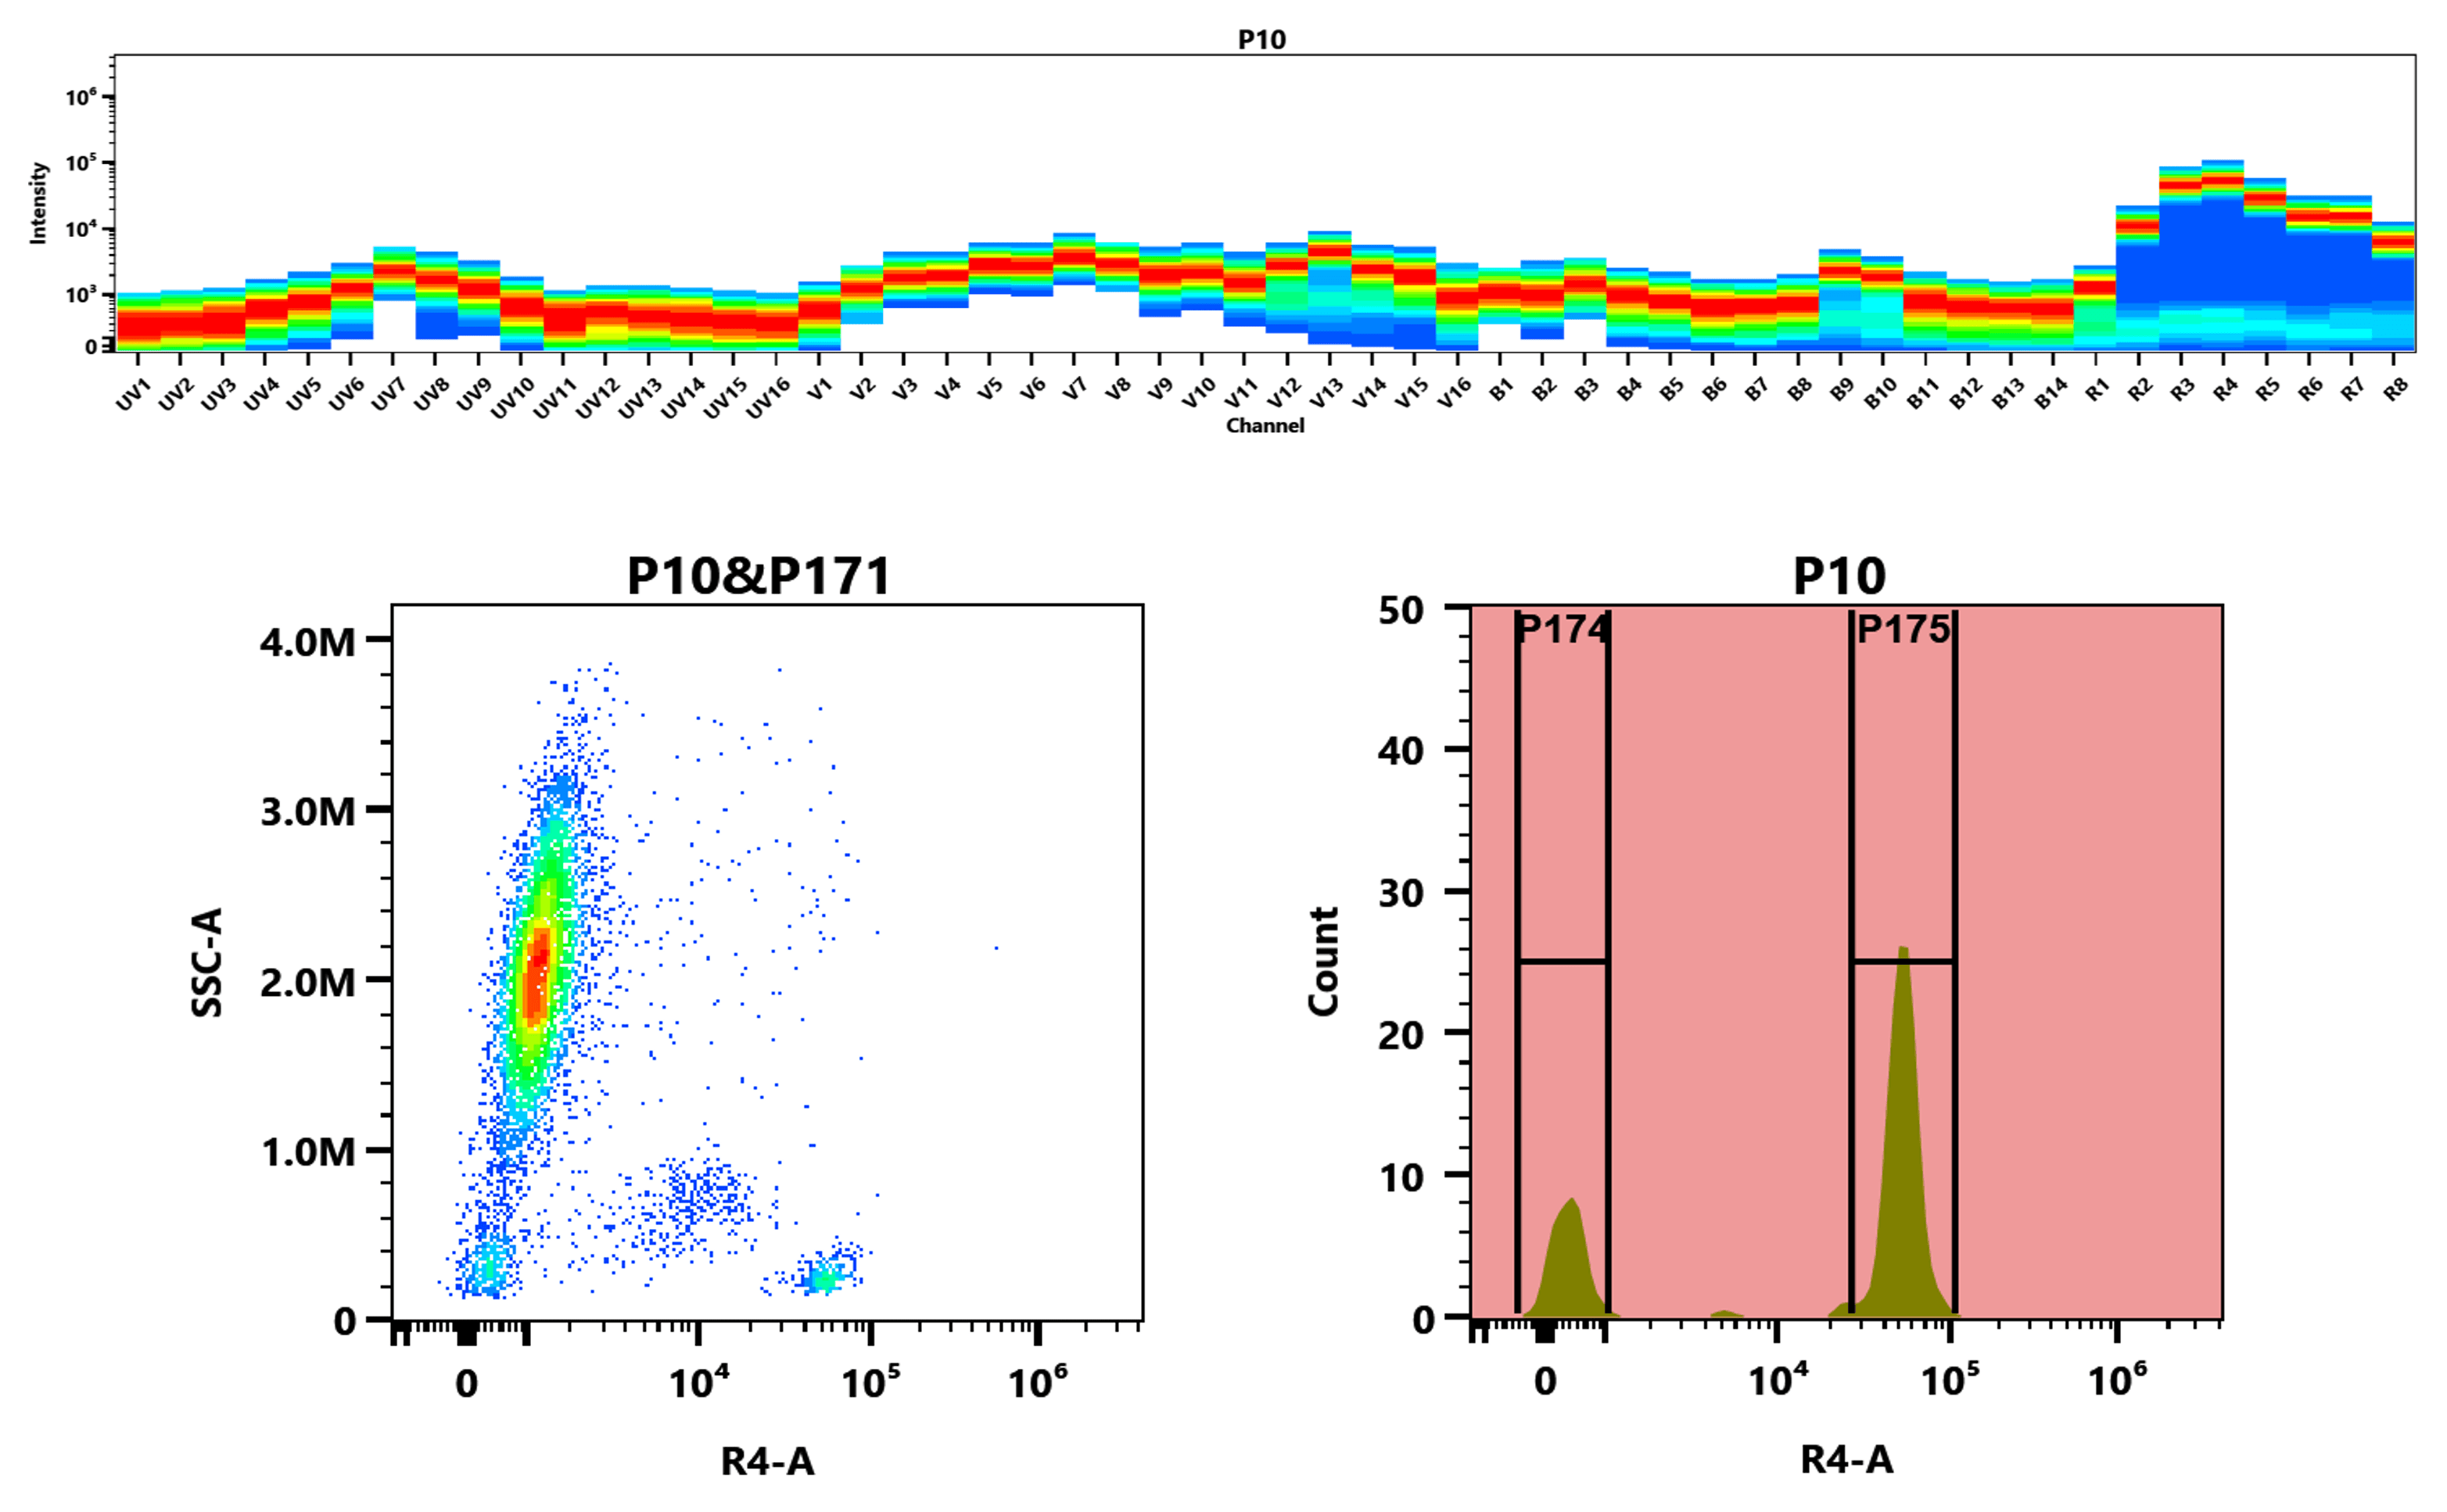 Top) The Spectral pattern was generated using a 4-laser spectral cytometer. Four spatially offset lasers (355 nm, 405 nm, 488 nm, and 640 nm) were used to create four distinct emission profiles, which, when combined, yielded the overall spectral signature. Bottom) Flow cytometry analysis of whole blood stained with XFD680 anti-human CD4 *SK3* conjugate. The fluorescence signal was monitored using an Aurora spectral flow cytometer in the XFD680 R4-A channel.